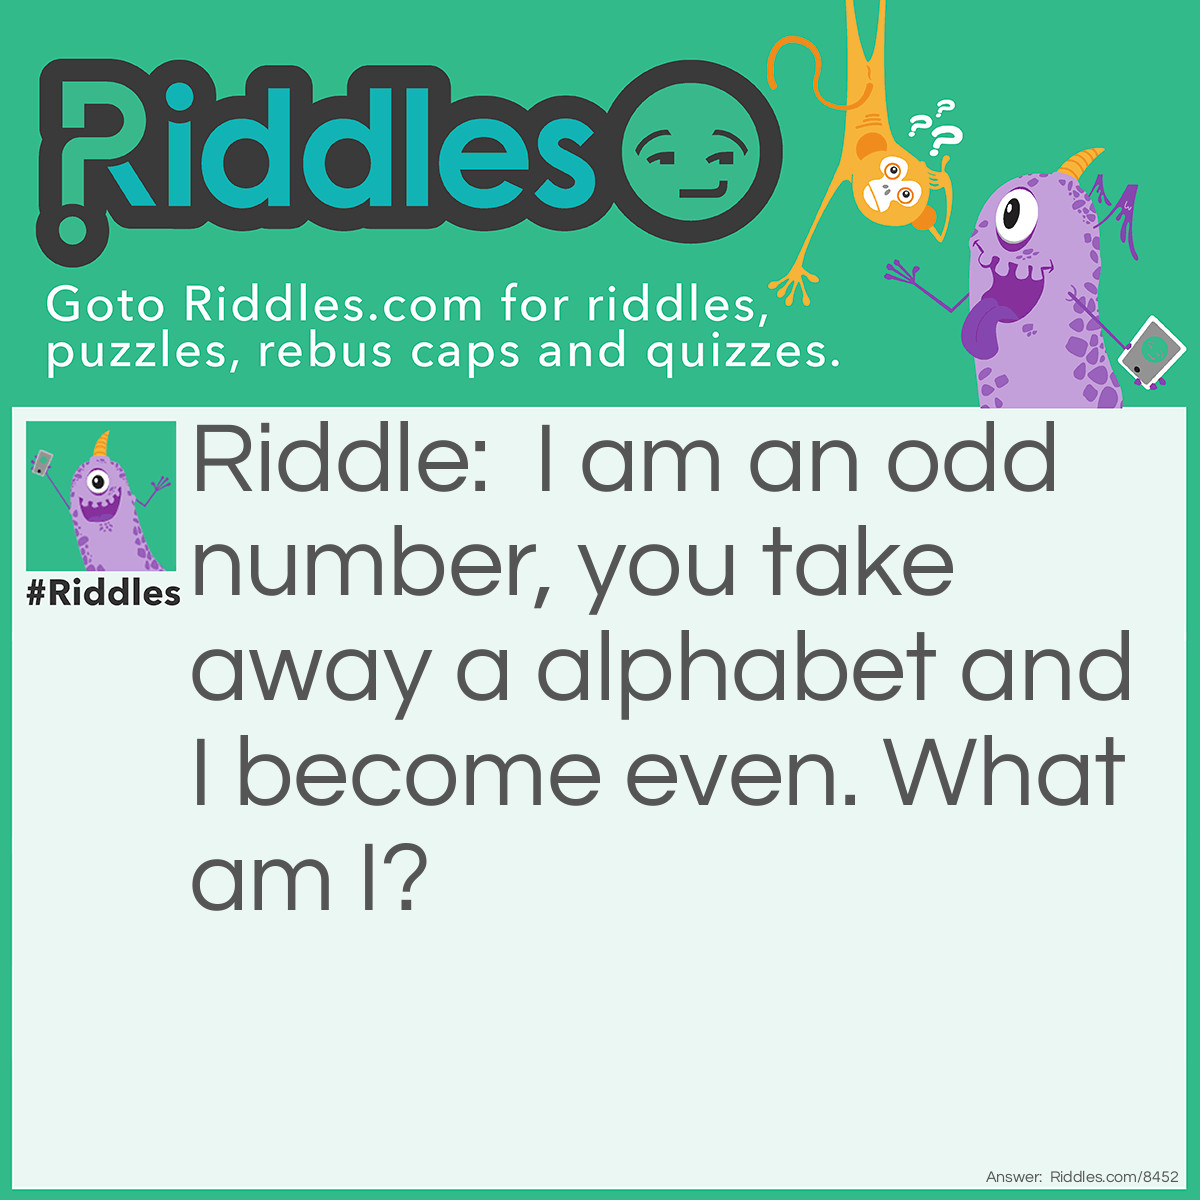 Riddle: I am an odd number, you take away a alphabet and I become even. What am I? Answer: 7 (seven;s=even)